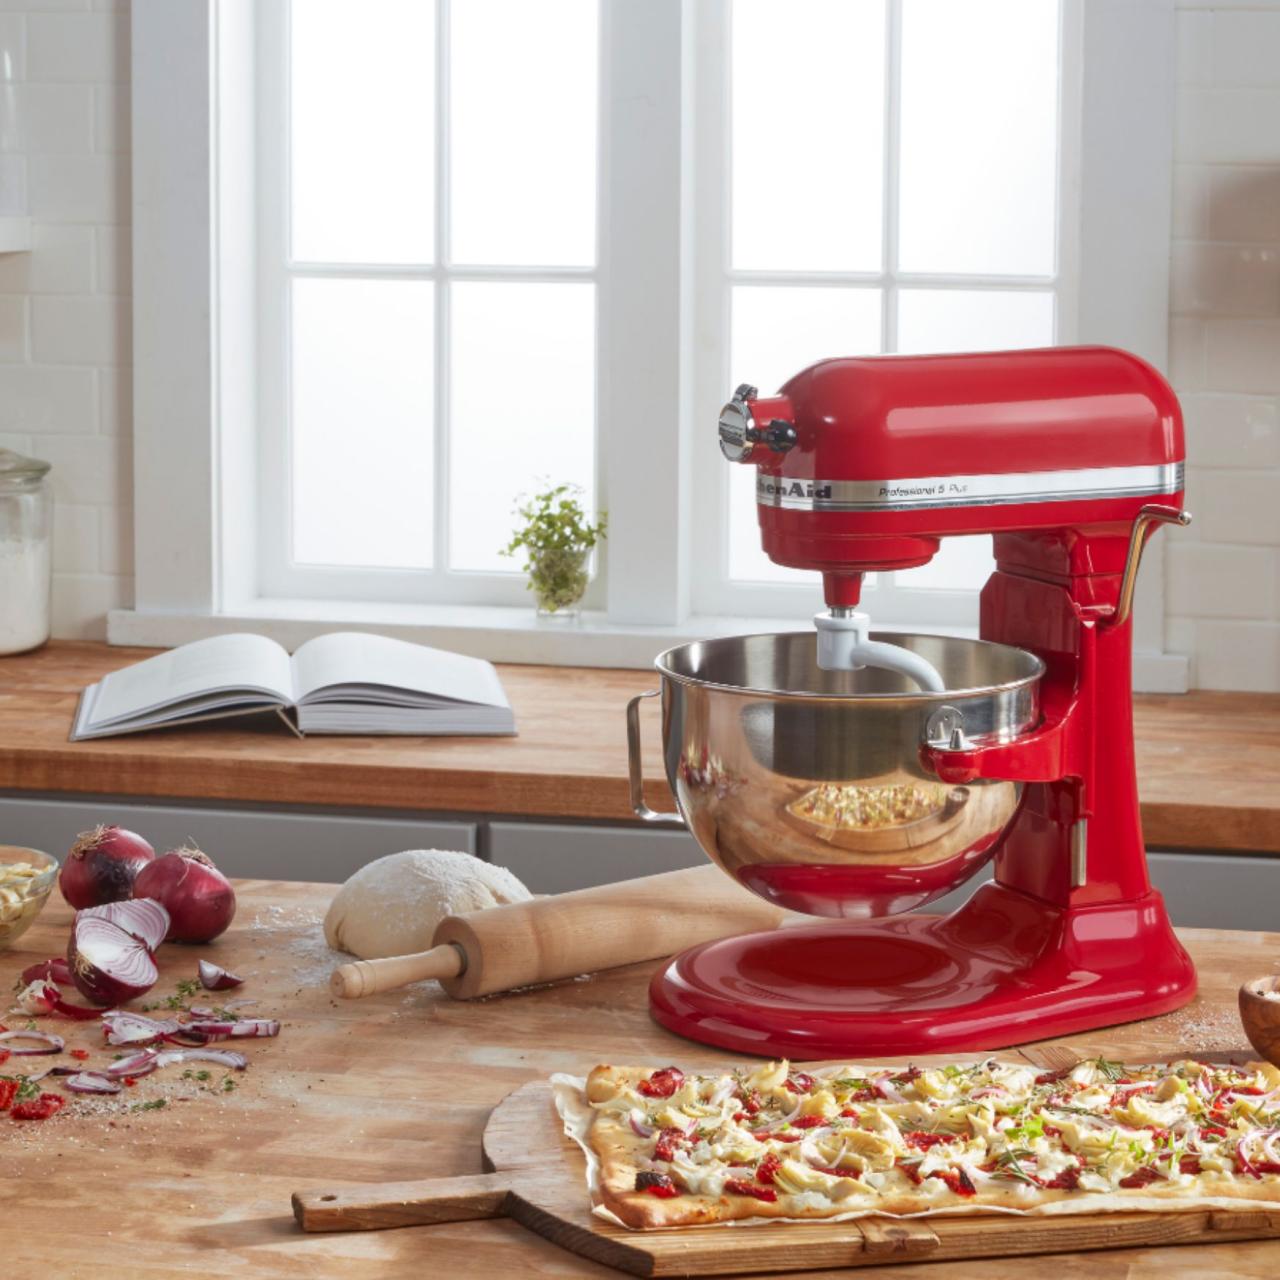 KitchenAid sale: Don't miss this major discount on one of our